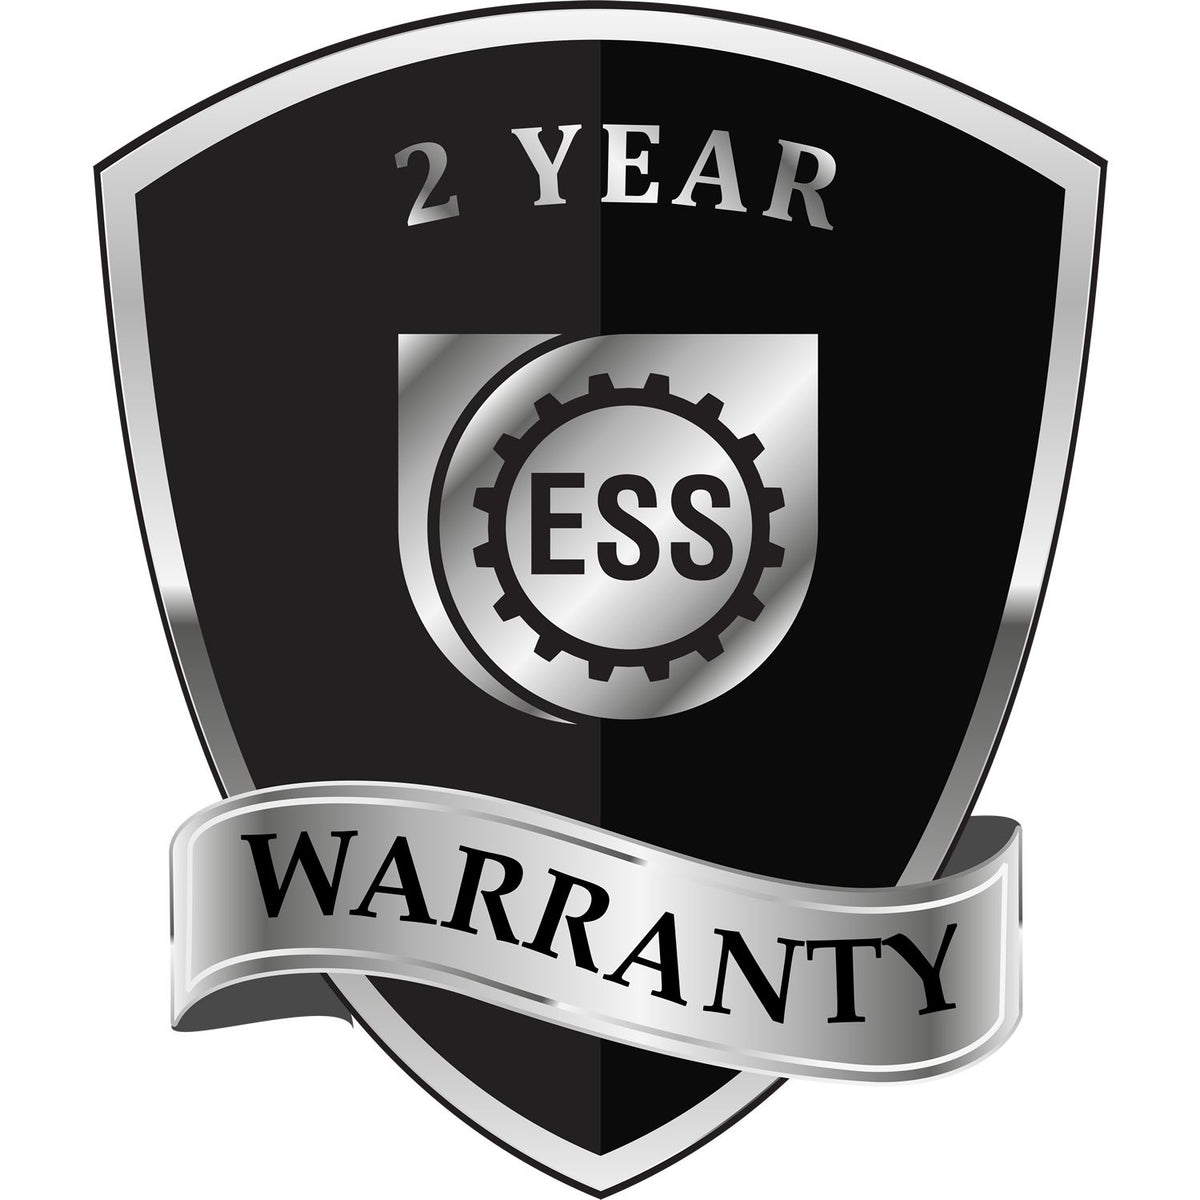 A black and silver badge or emblem showing warranty information for the Gift Missouri Geologist Seal